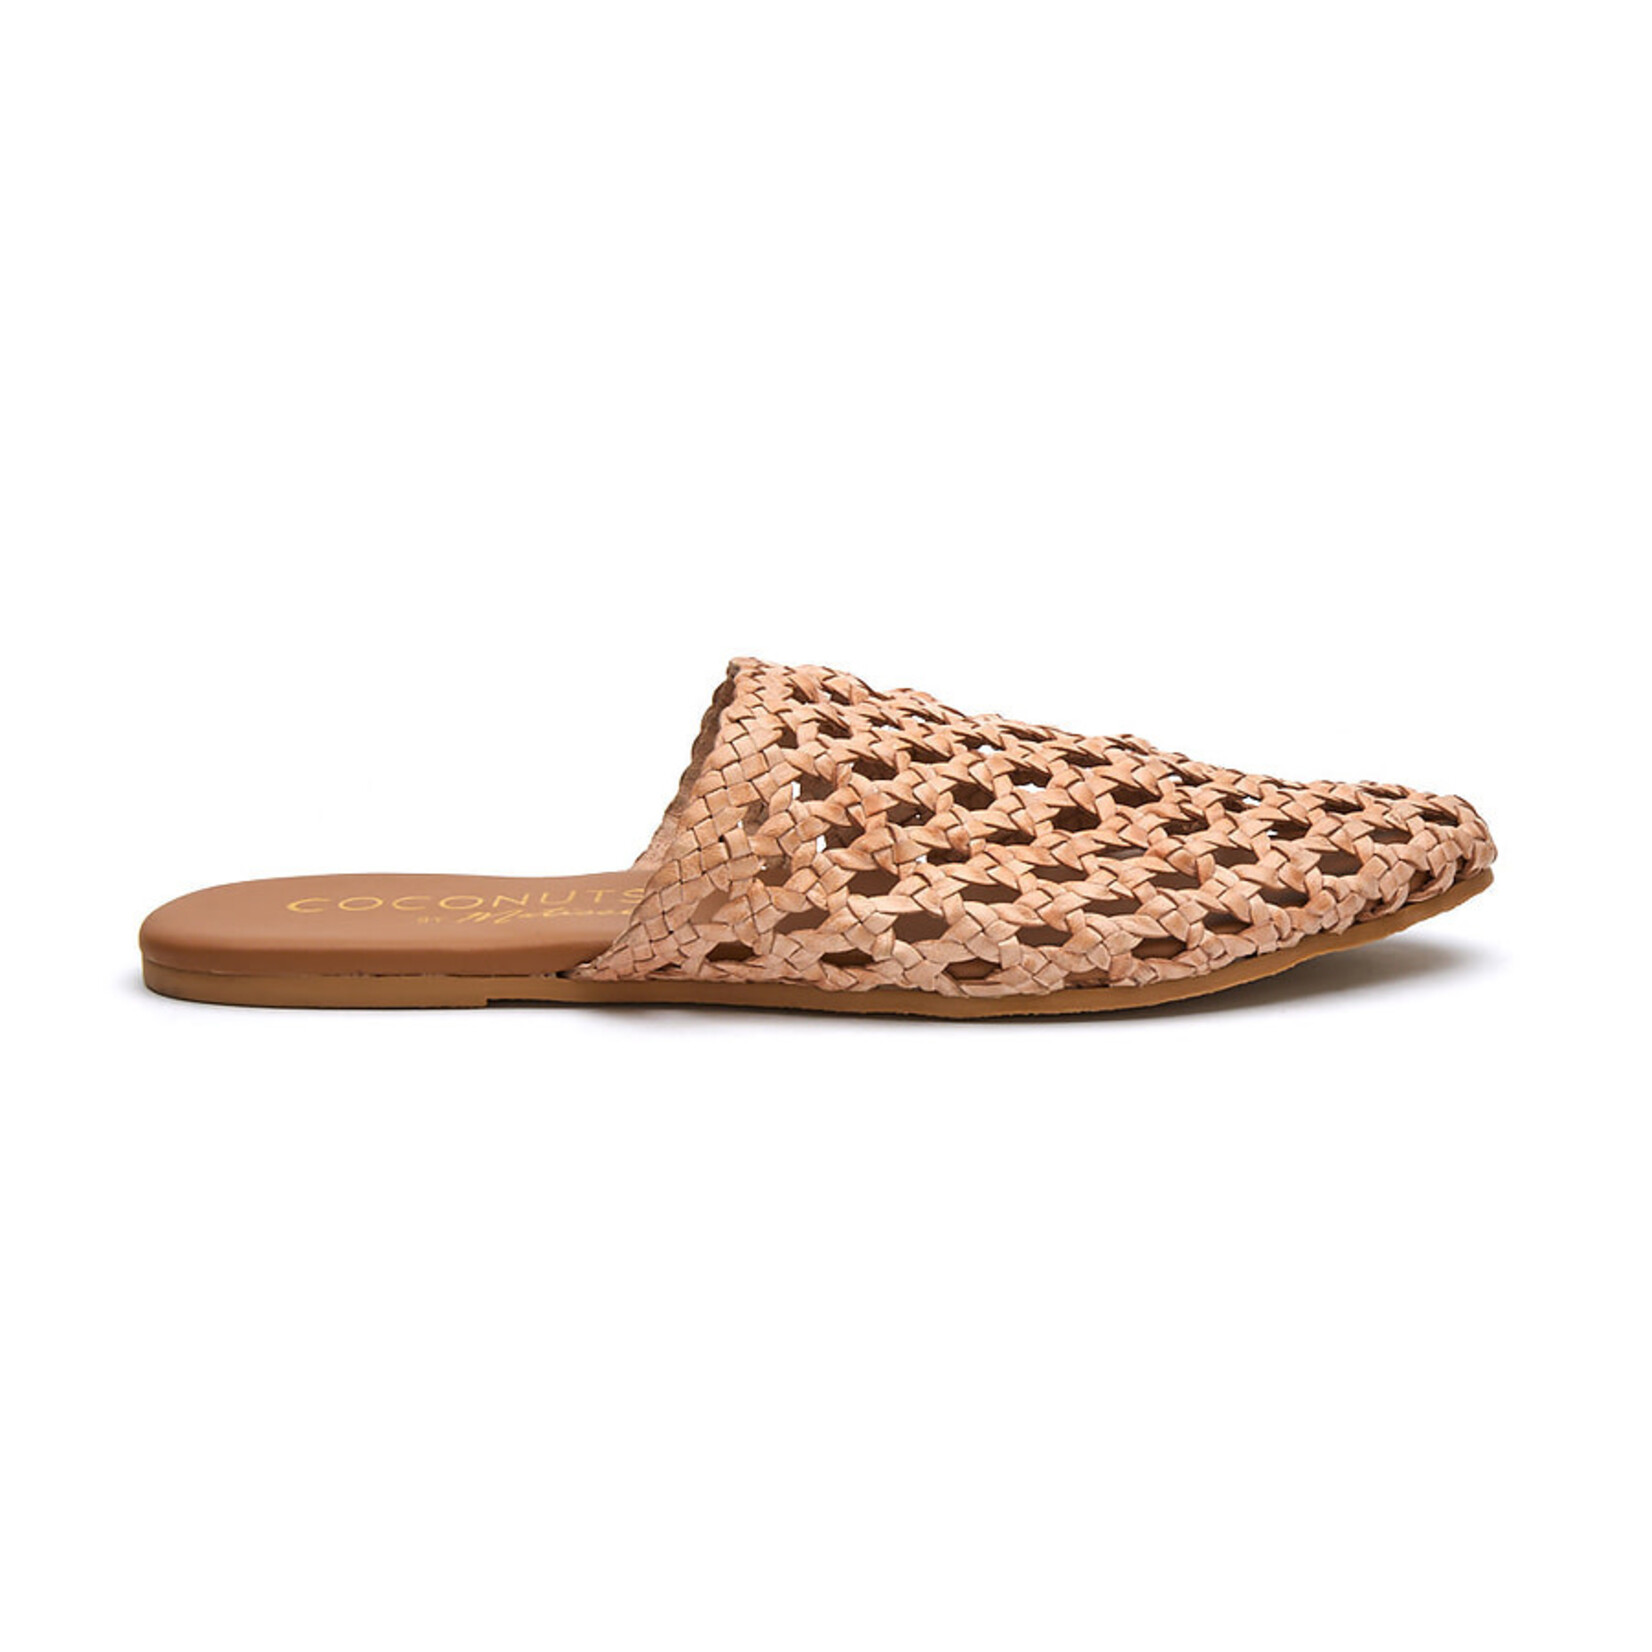 Matisse Every Woven Mule